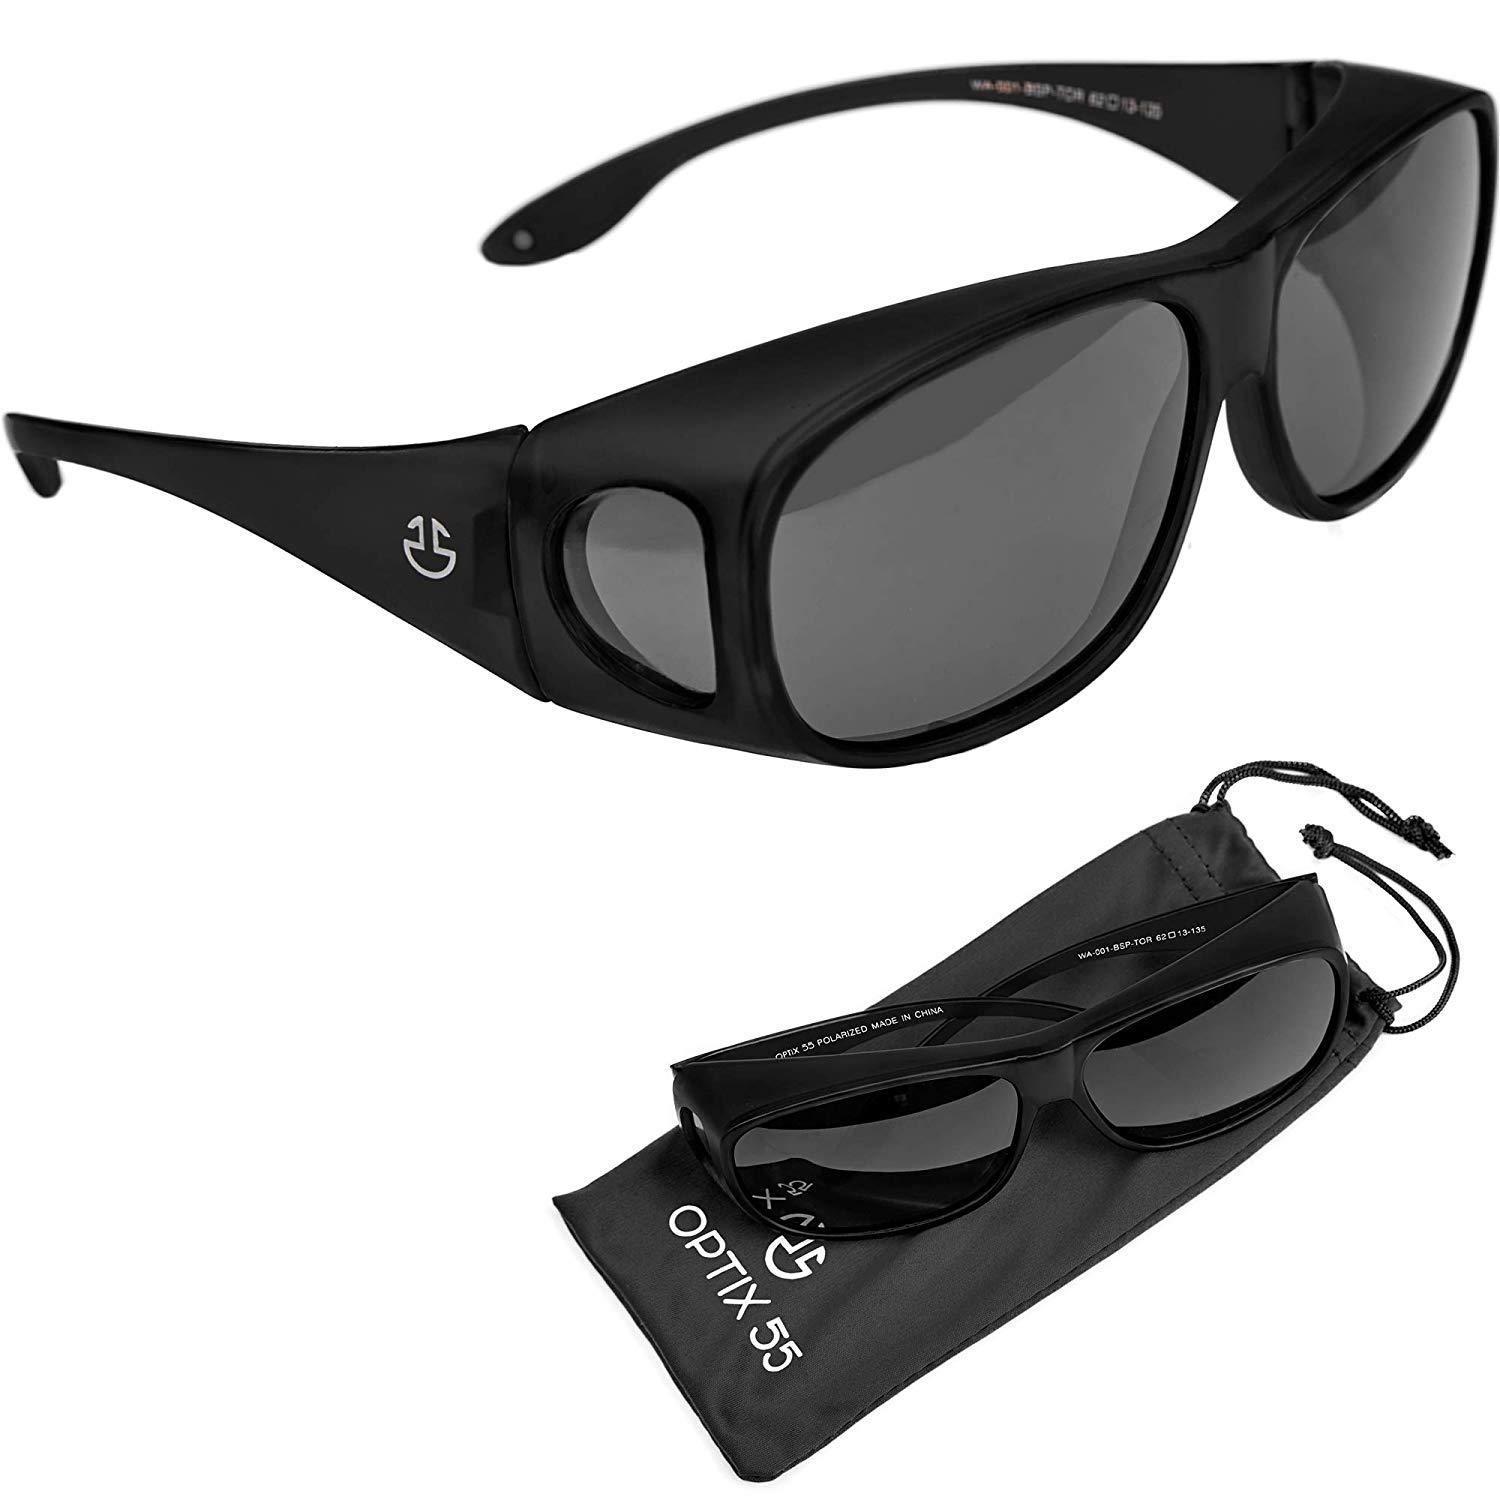 Wrap Around Sunglasses, UV Protection to Wear as Fit Over Glasses ...